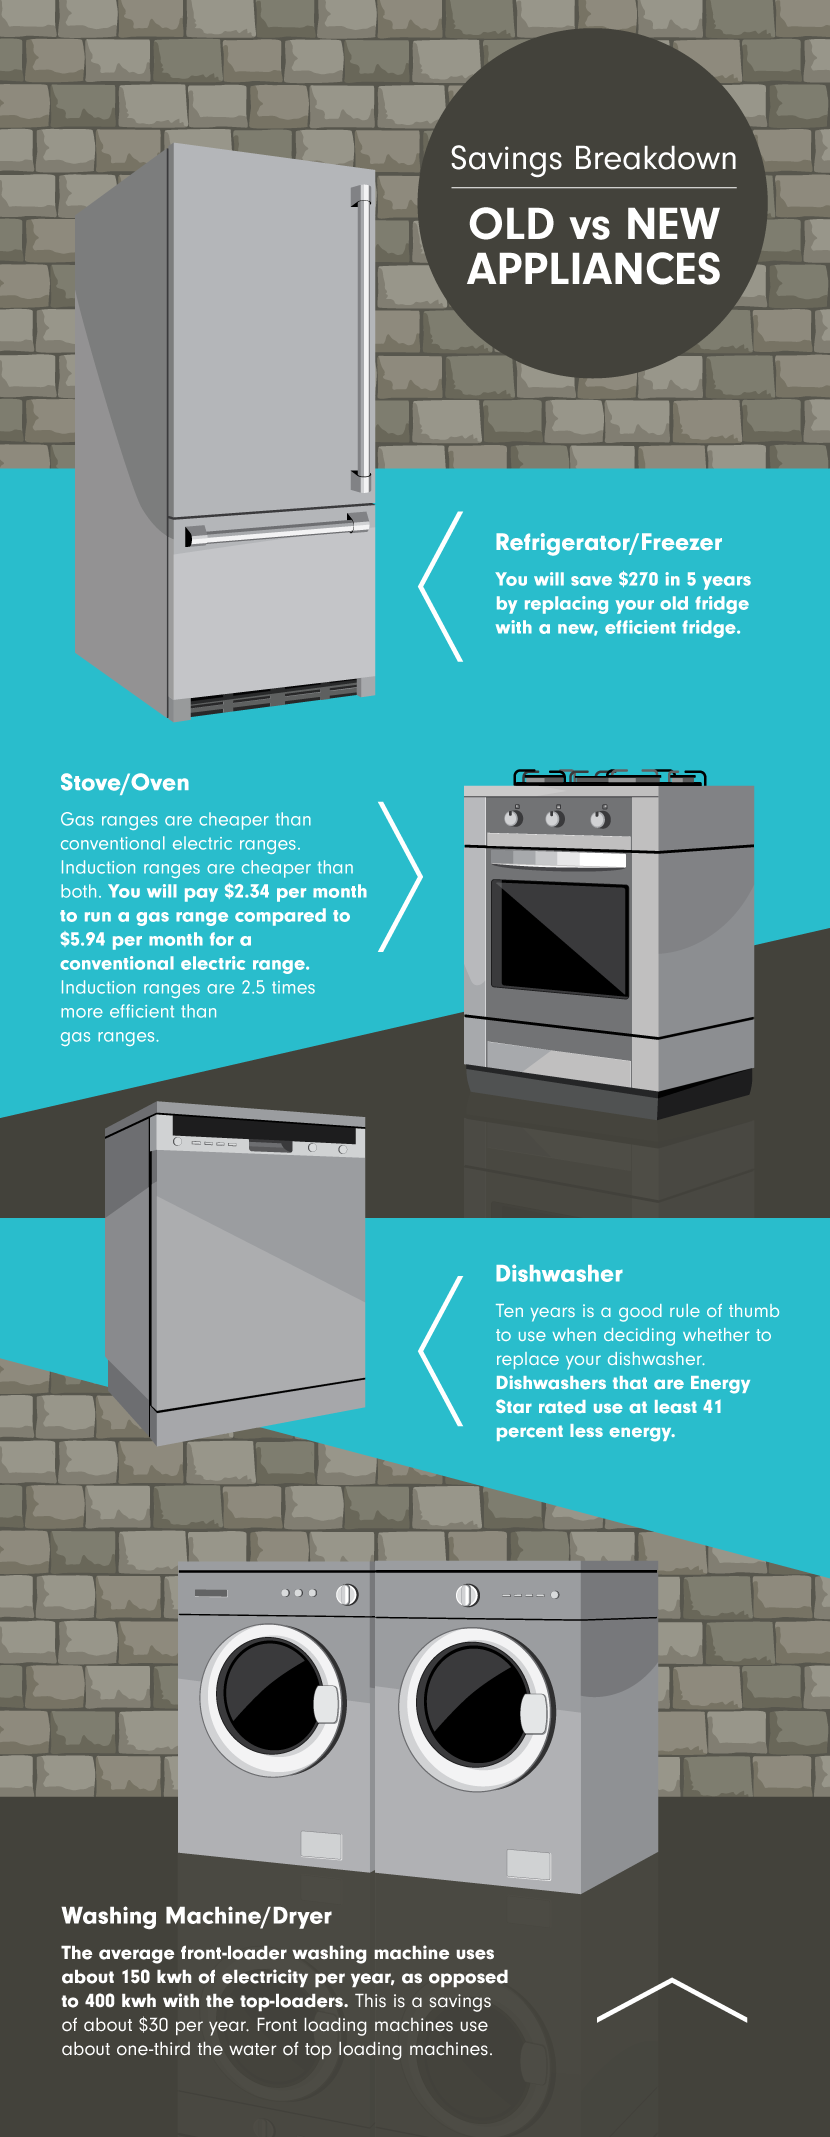 Old Vs New Appliances - The Environmental Impact of Using Energy-Efficient Major Appliances